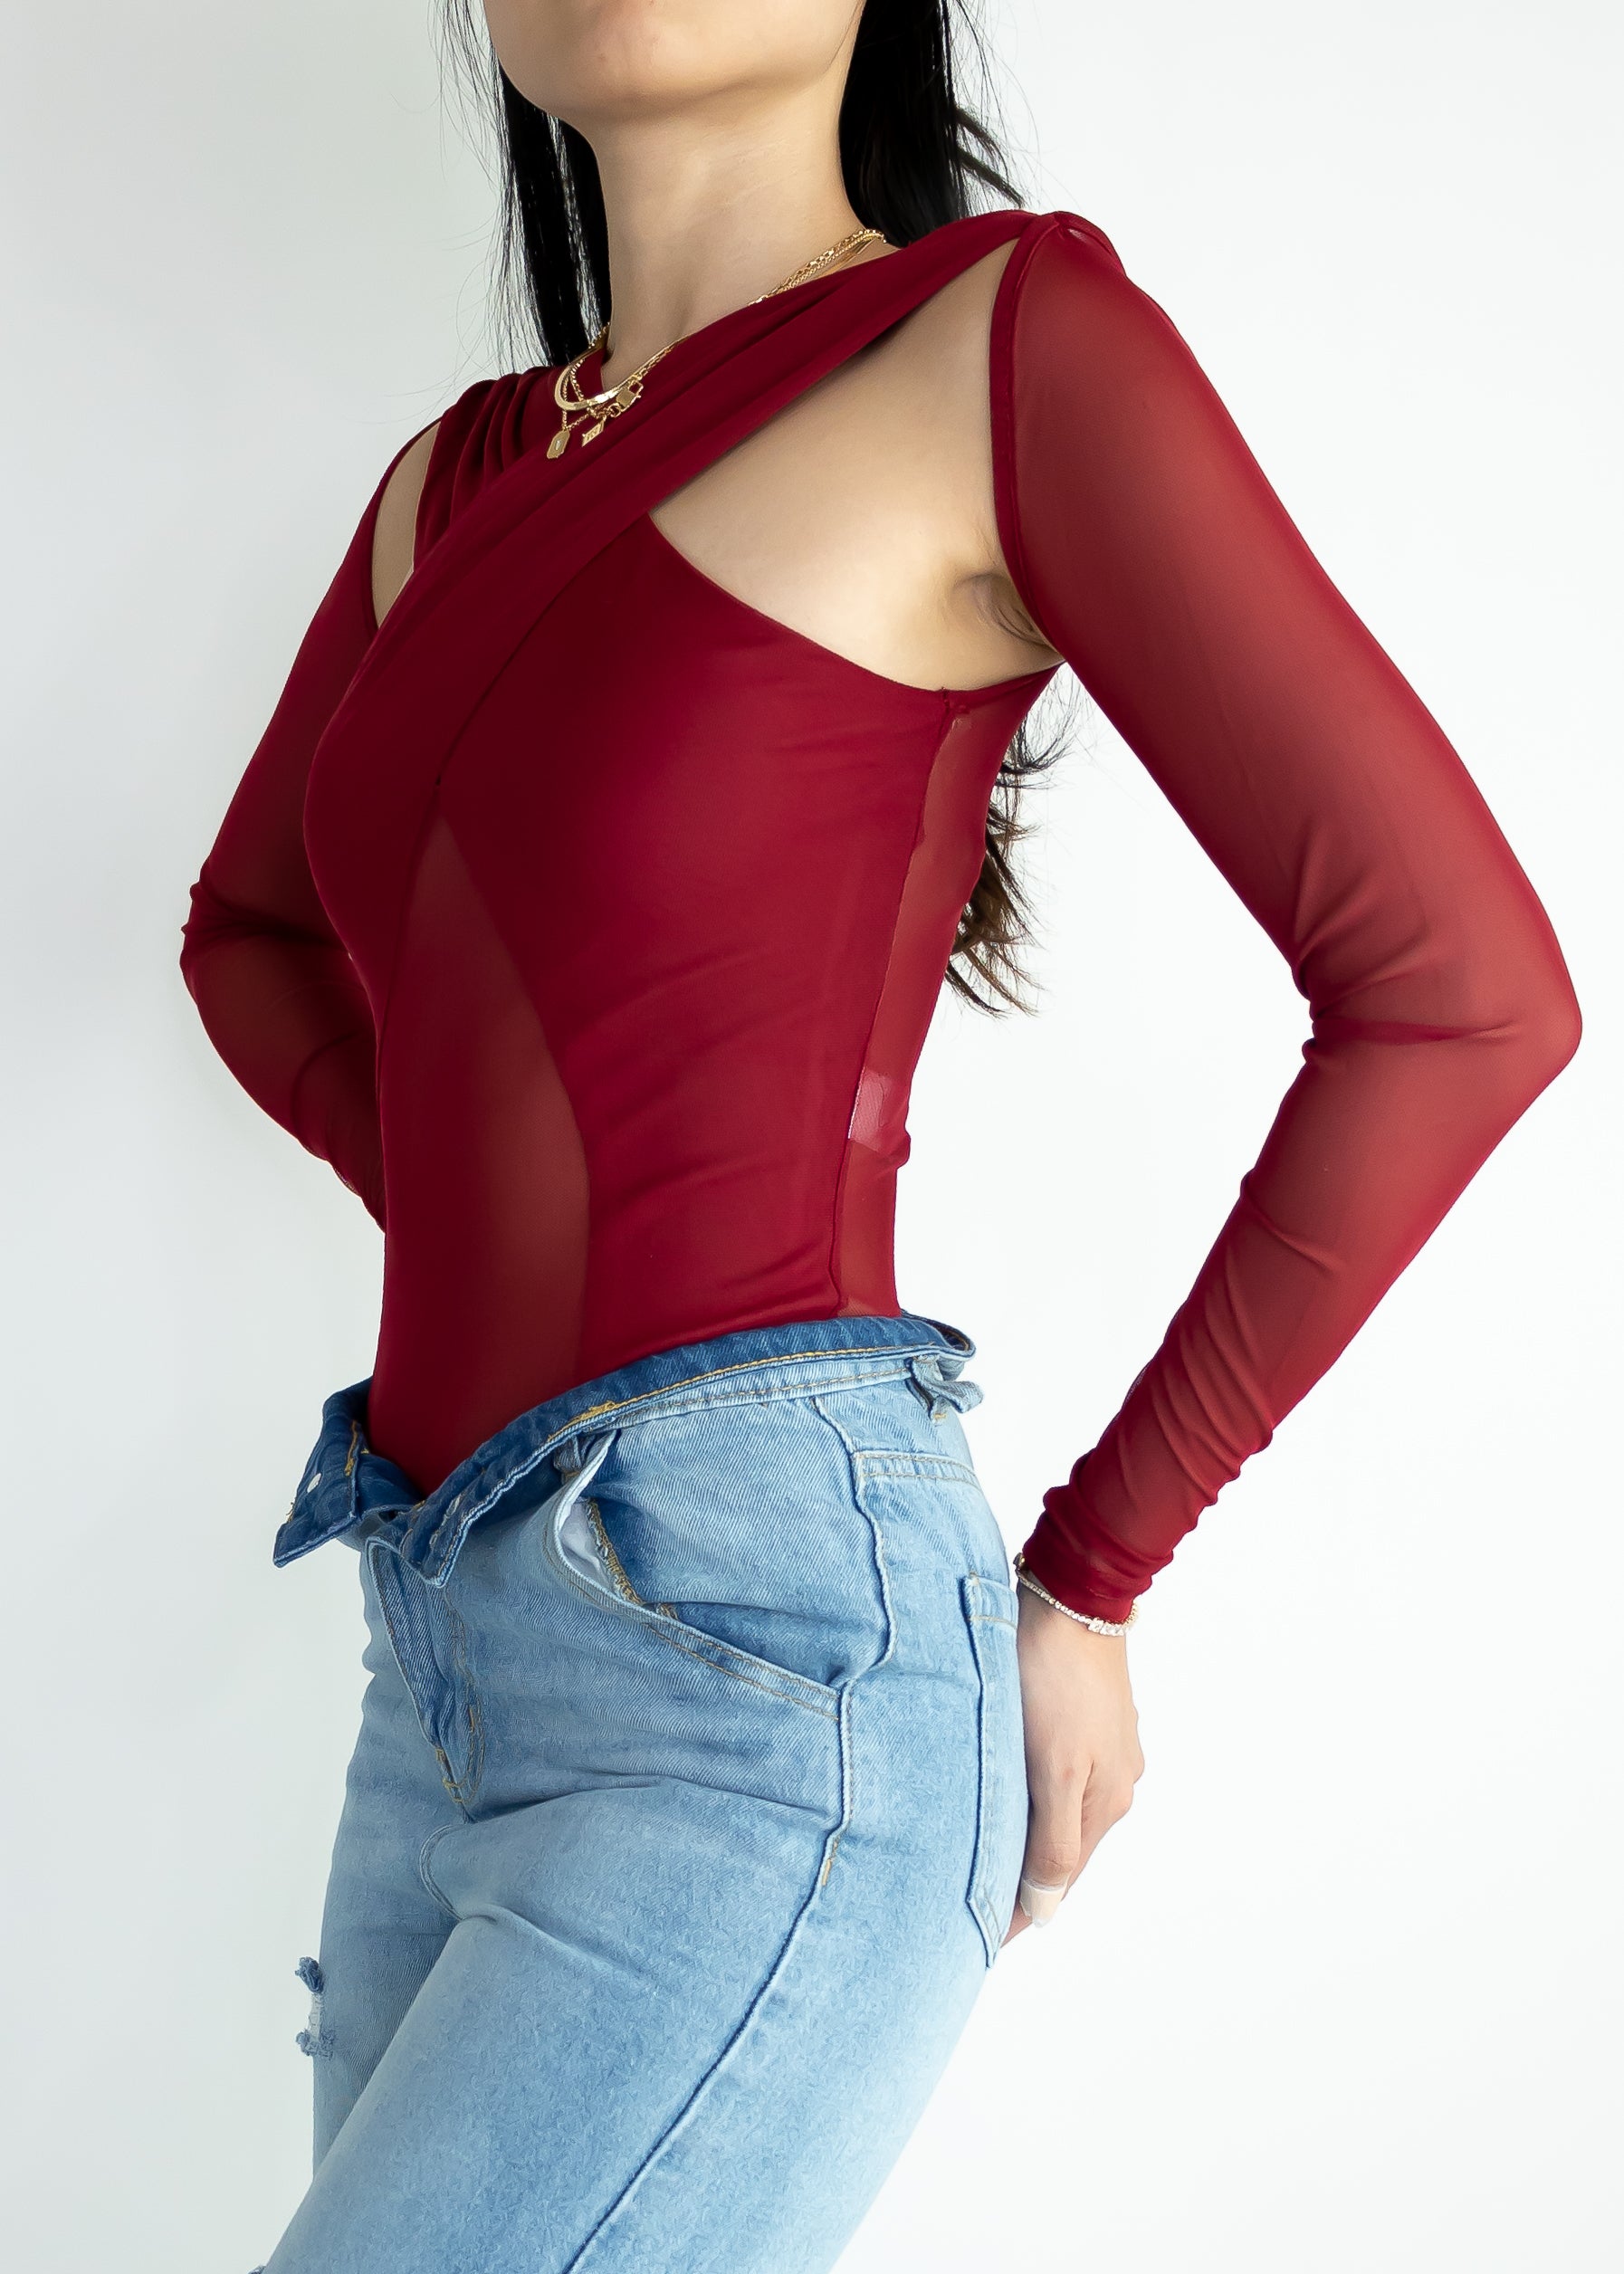 Long-sleeve bodysuit for cocktails and parties